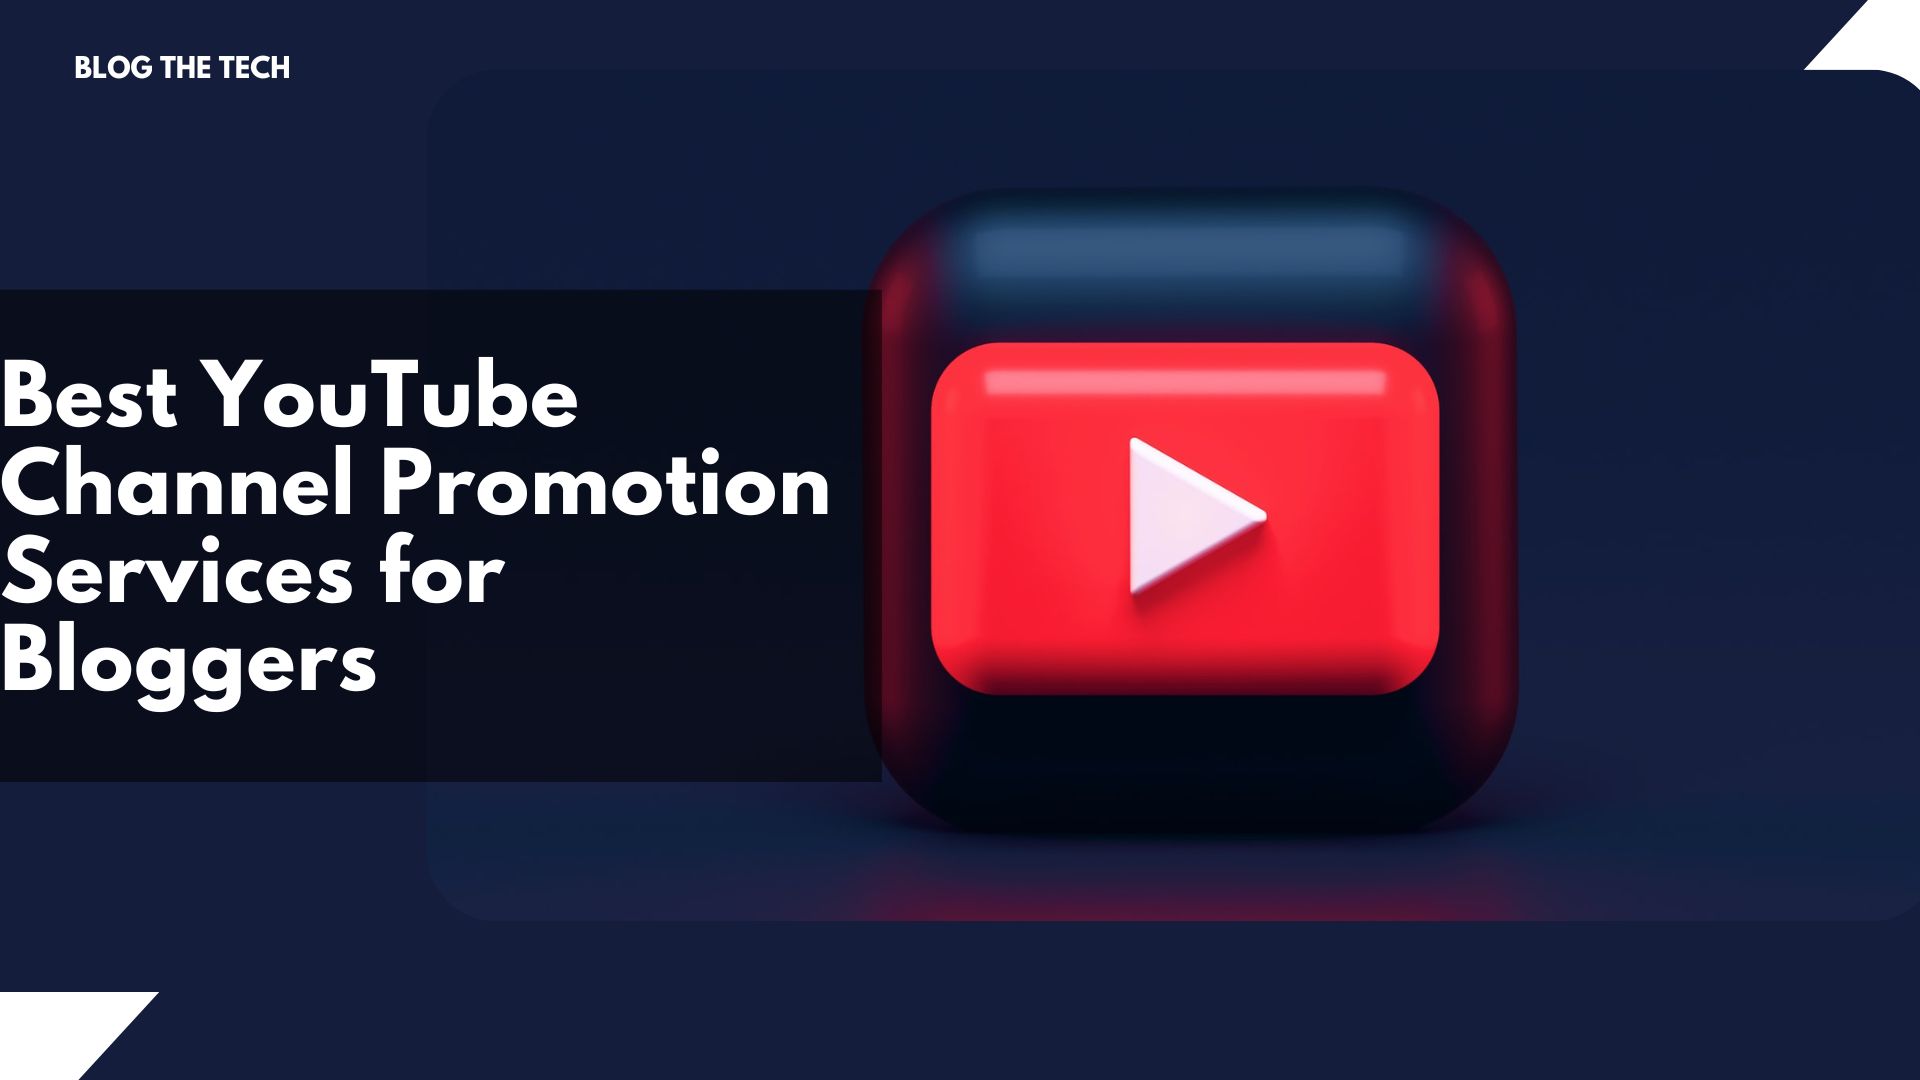 5 Best YouTube Video Promotion Services for Bloggers